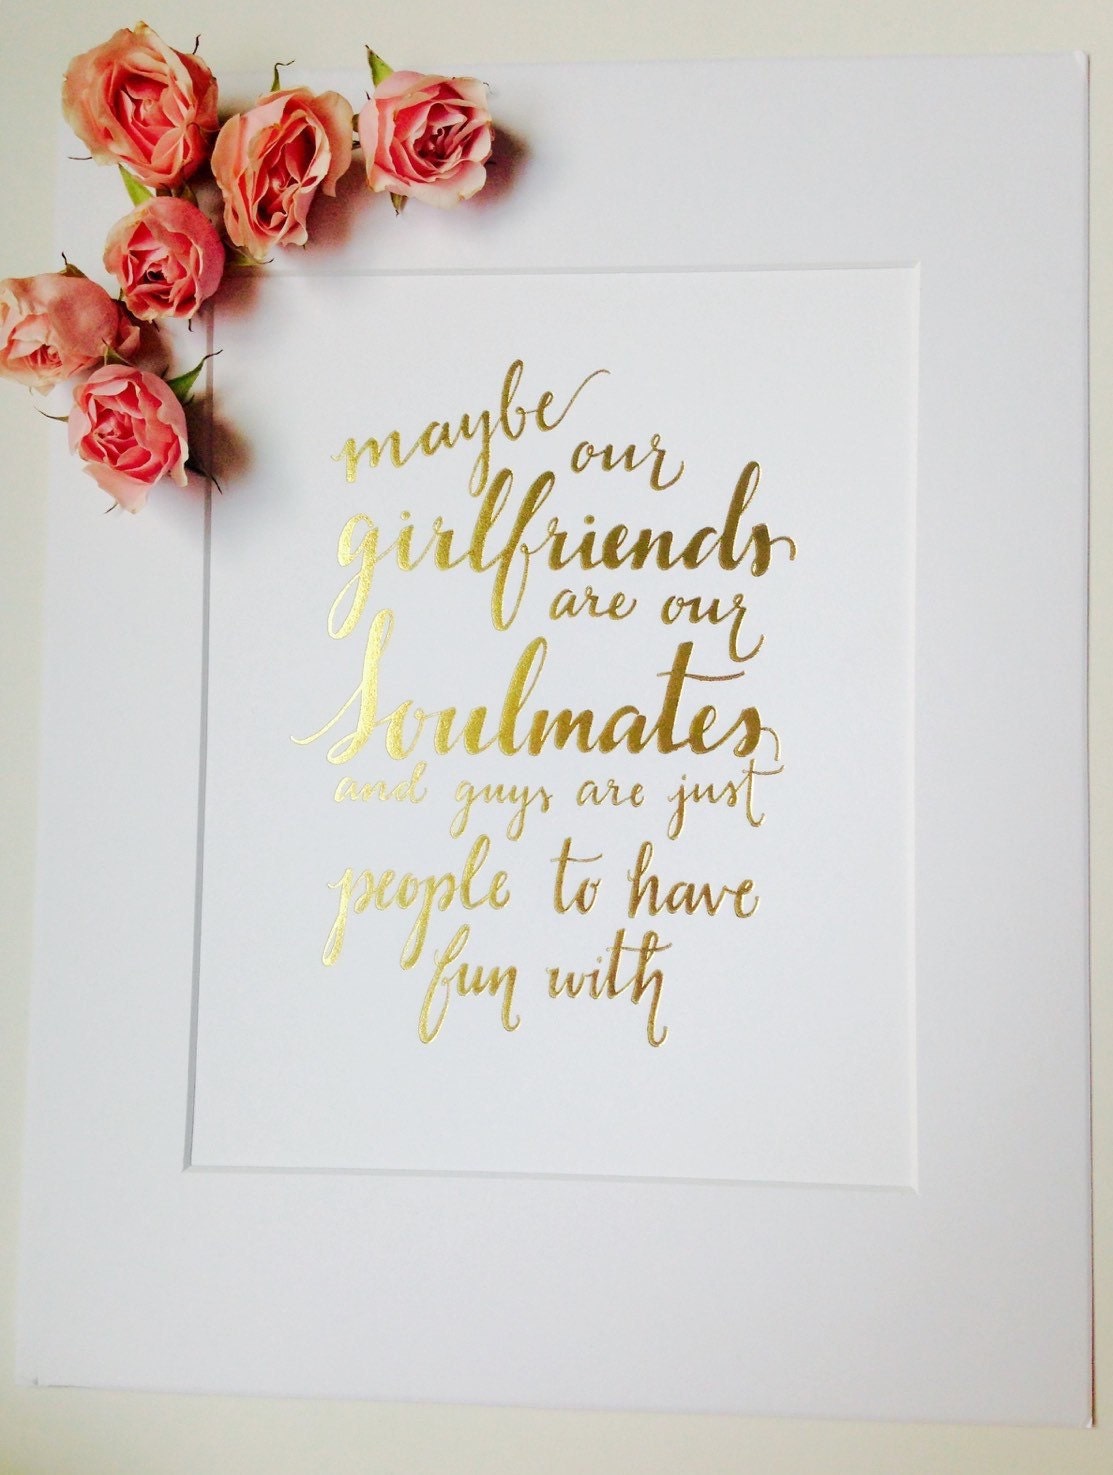 Best Friend Quote Soulmates Sex And The City от Velvetcrowndesign